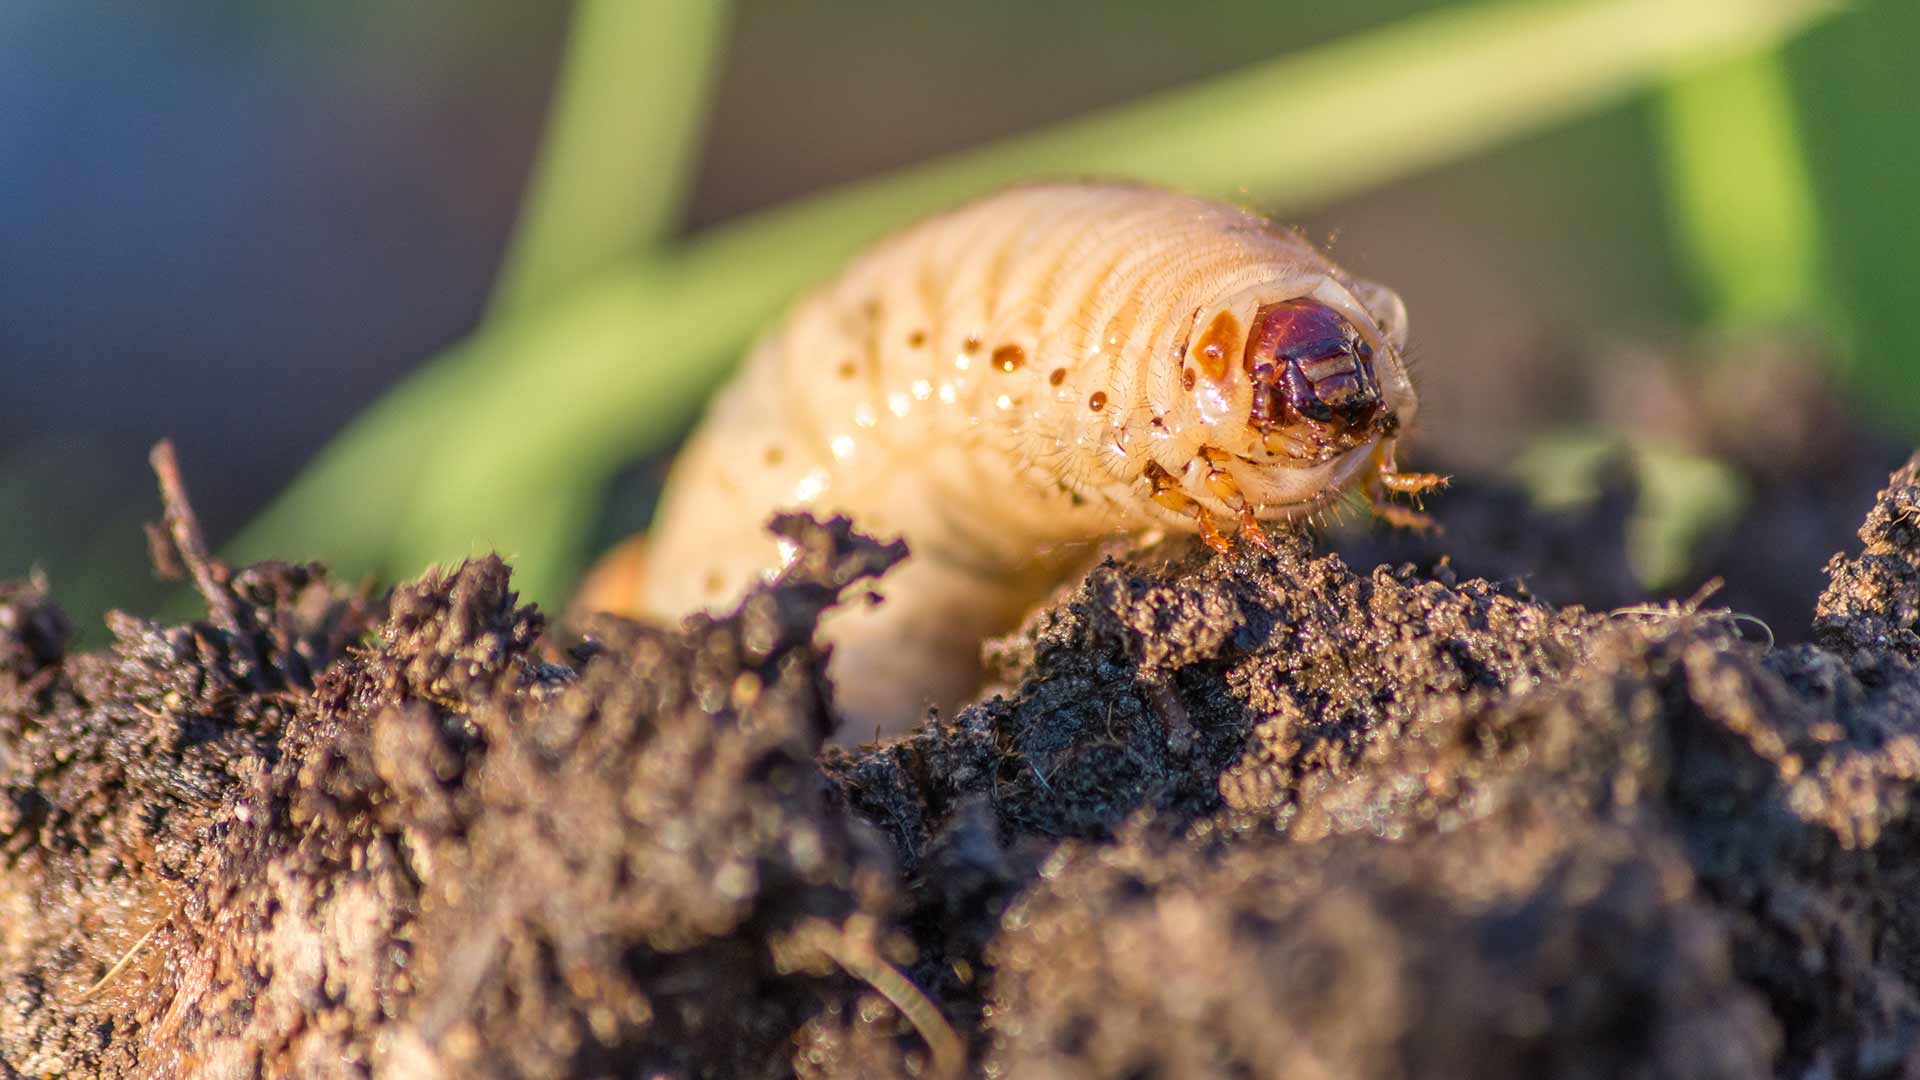 Lawn grub worm emerging from soil at a Mansfield, Ohio property.